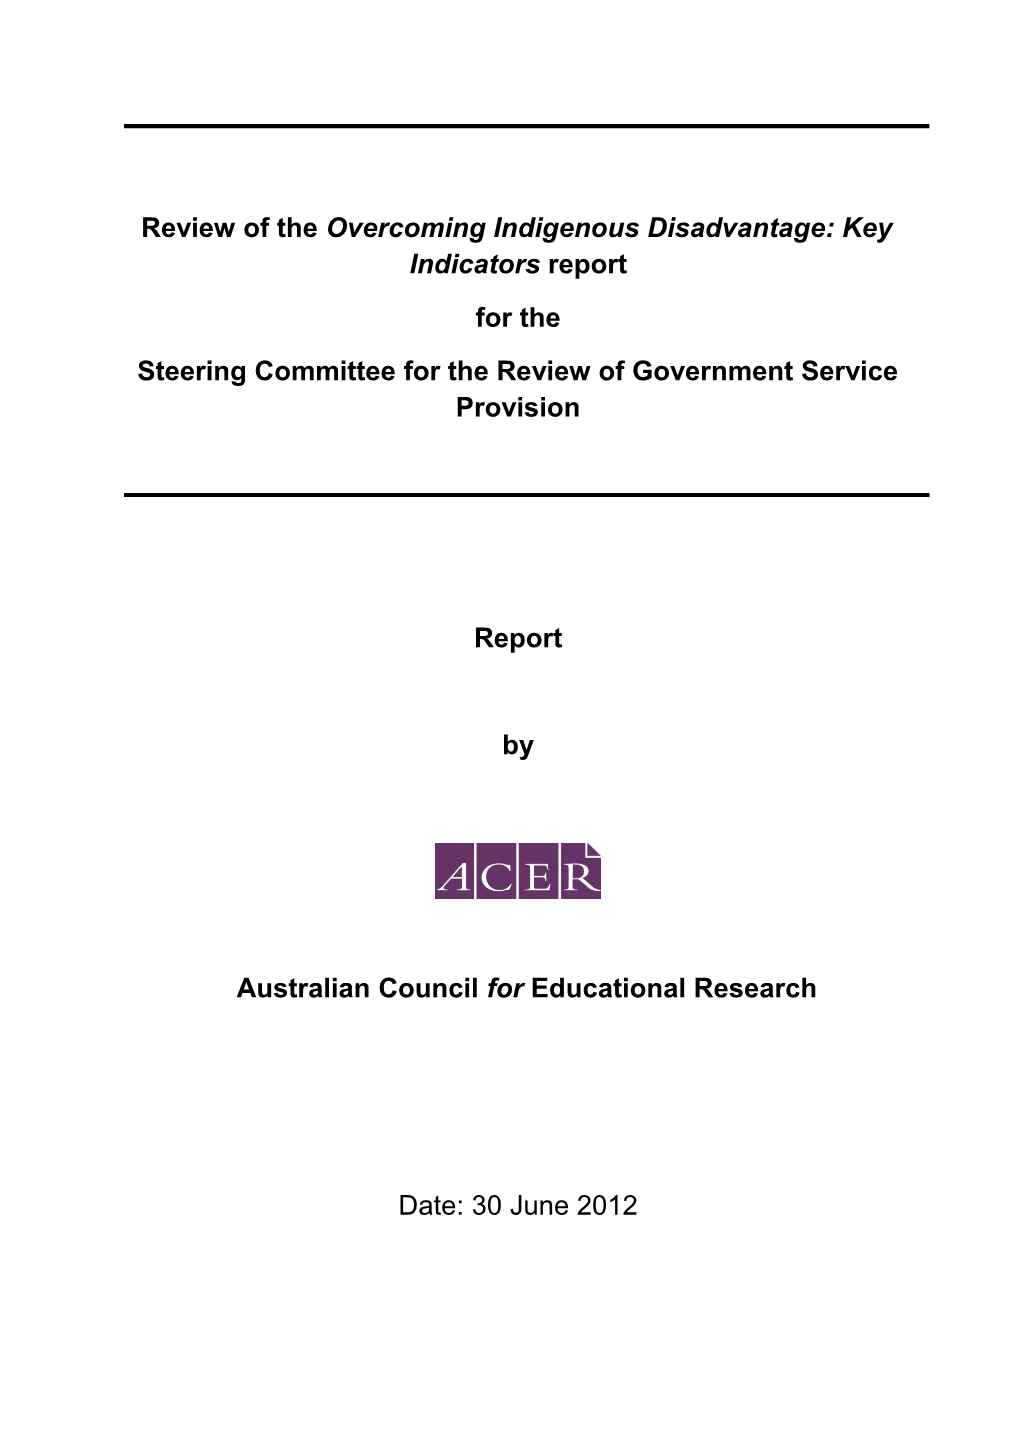 Review of the Overcoming Indigenous Disadvantage: Key Indicators Report